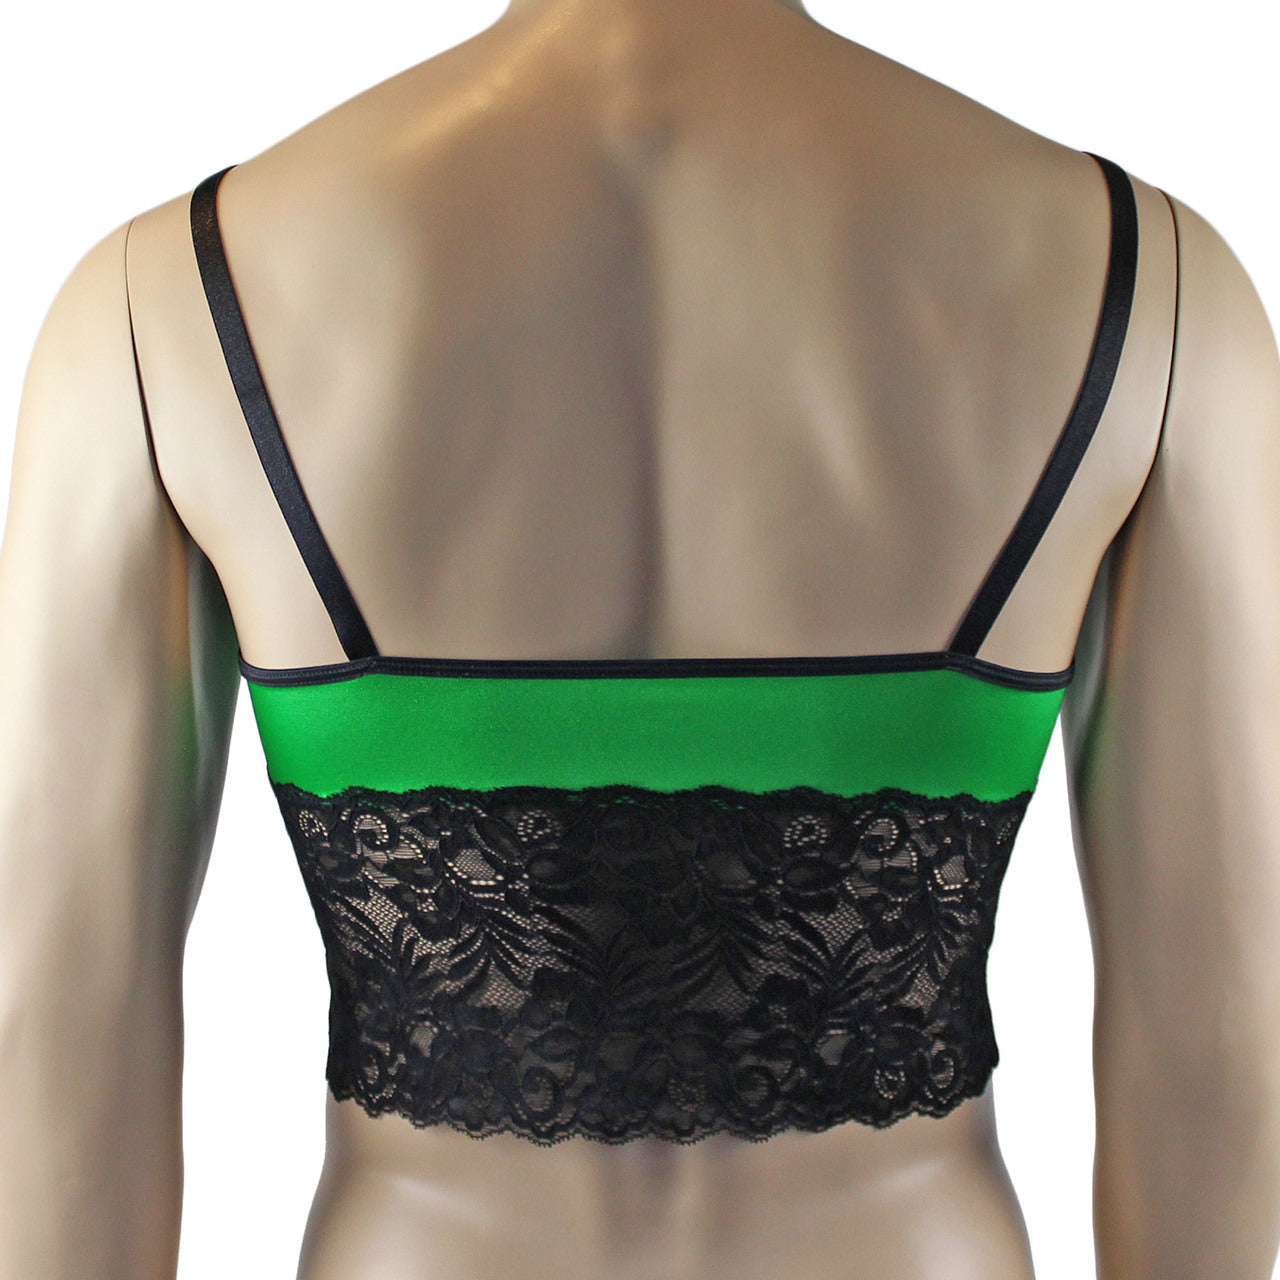 Mens Risque Camisole Top Boxer Briefs Green and Black Lace